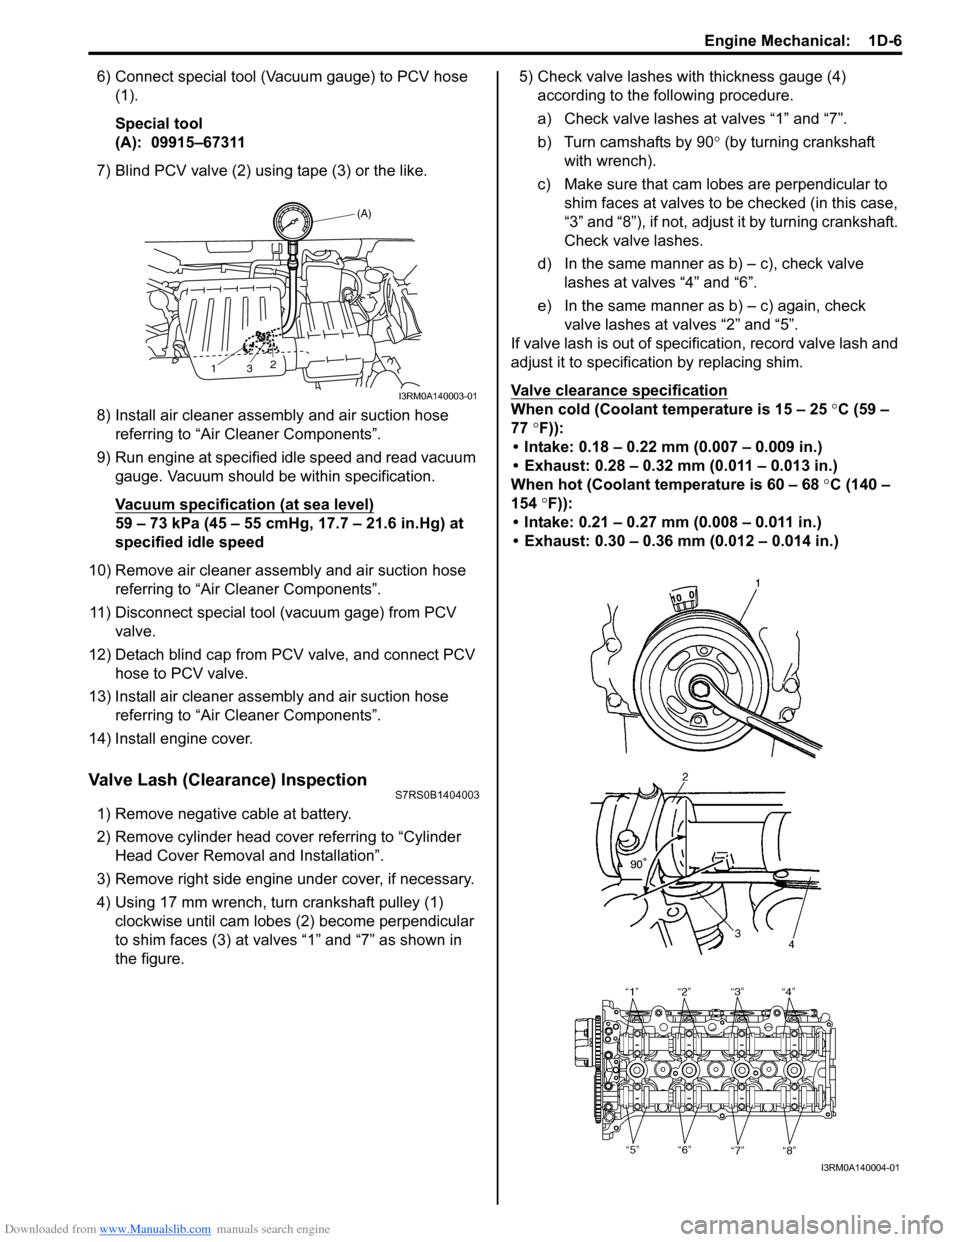 SUZUKI SWIFT 2005 2.G Service Service Manual Downloaded from www.Manualslib.com manuals search engine Engine Mechanical:  1D-6
6) Connect special tool (Vacuum gauge) to PCV hose (1).
Special tool
(A):  09915–67311
7) Blind PCV valve (2) using 